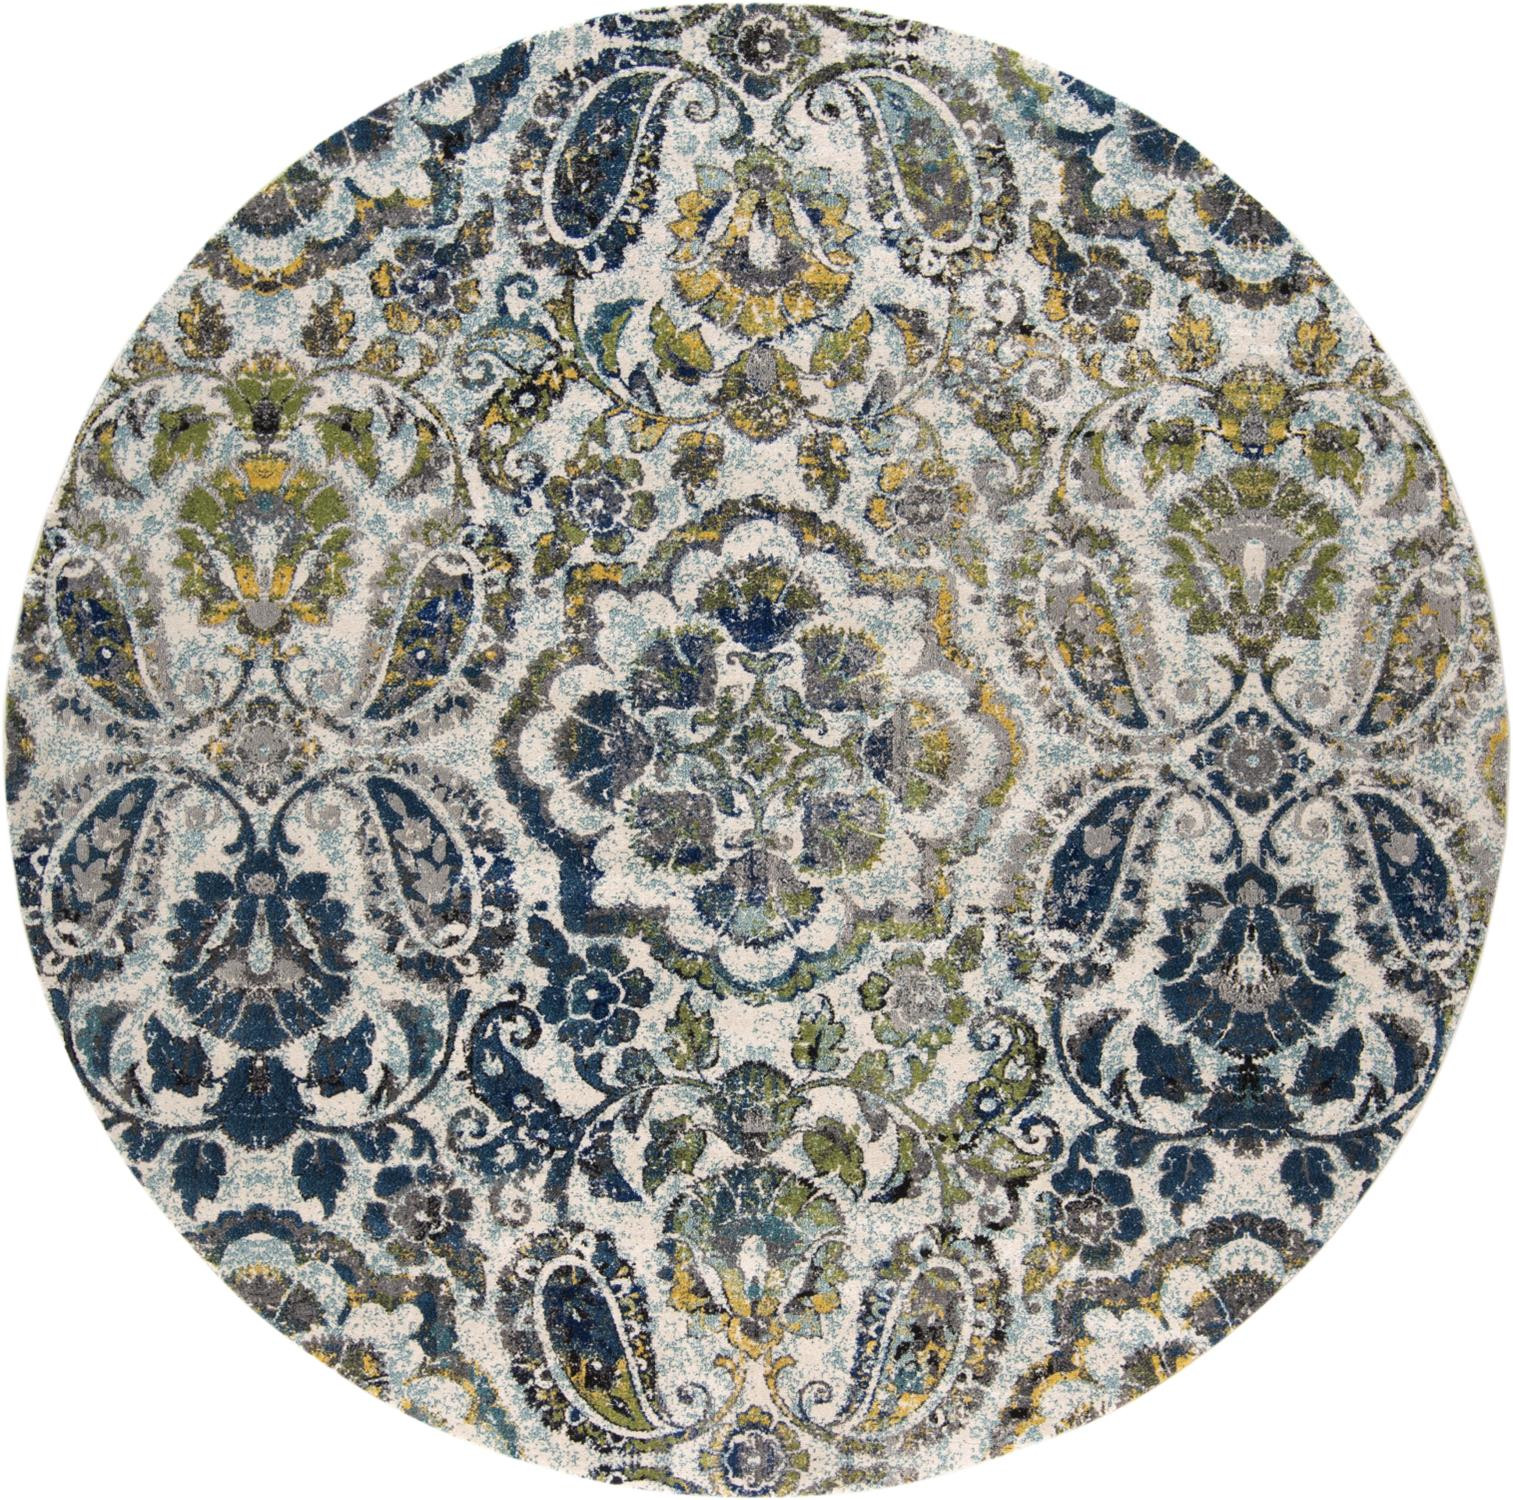 8' Ivory Blue And Green Round Floral Stain Resistant Area Rug-511150-1